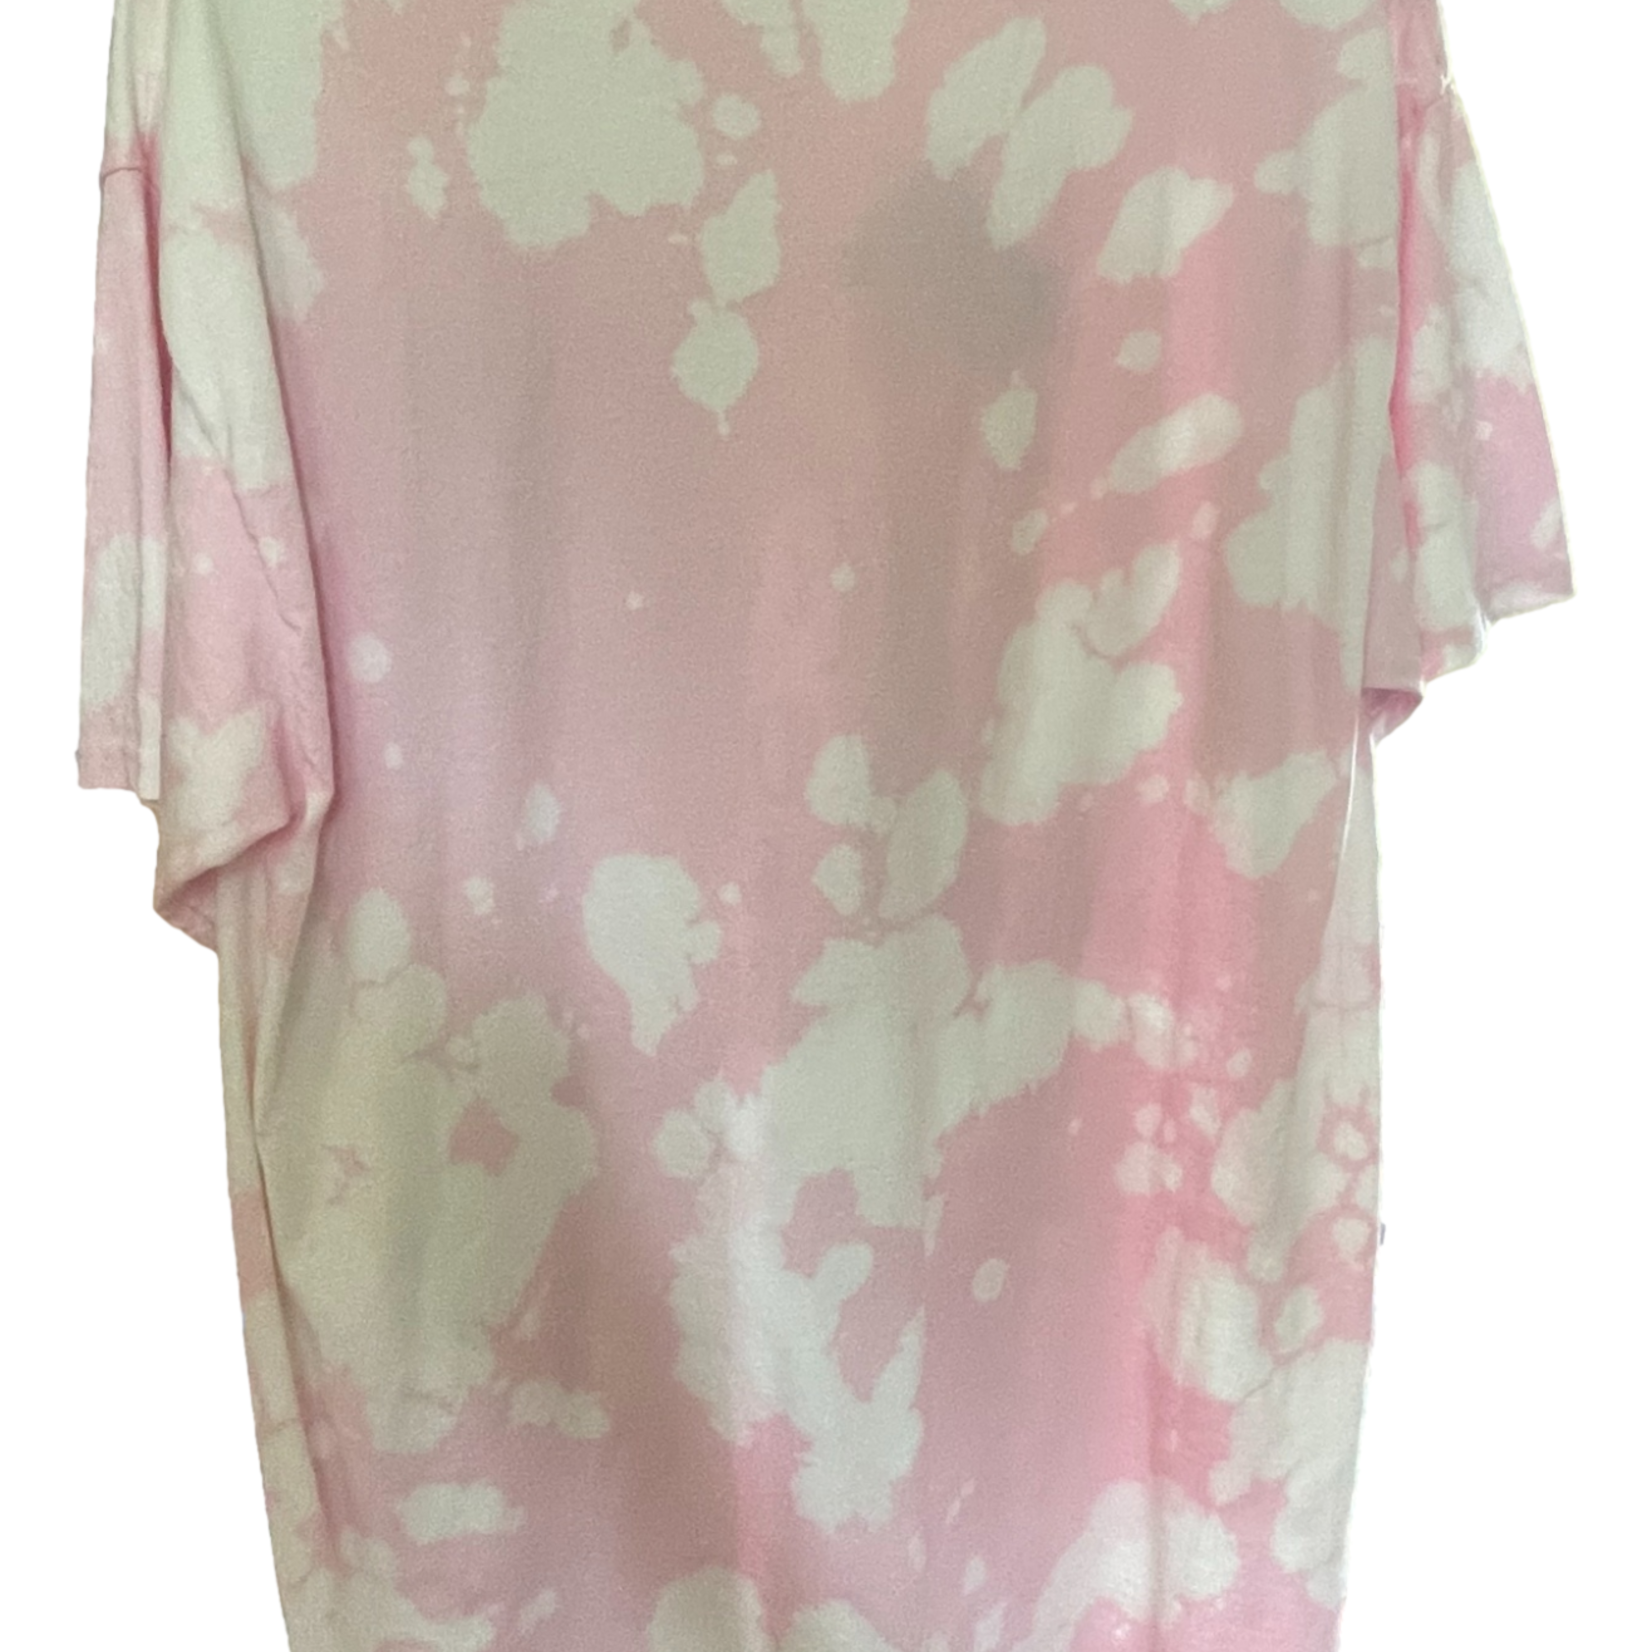 East Coast Sirens Bleached Light Pink T-Shirt - Large - High Tides, Good Vibes